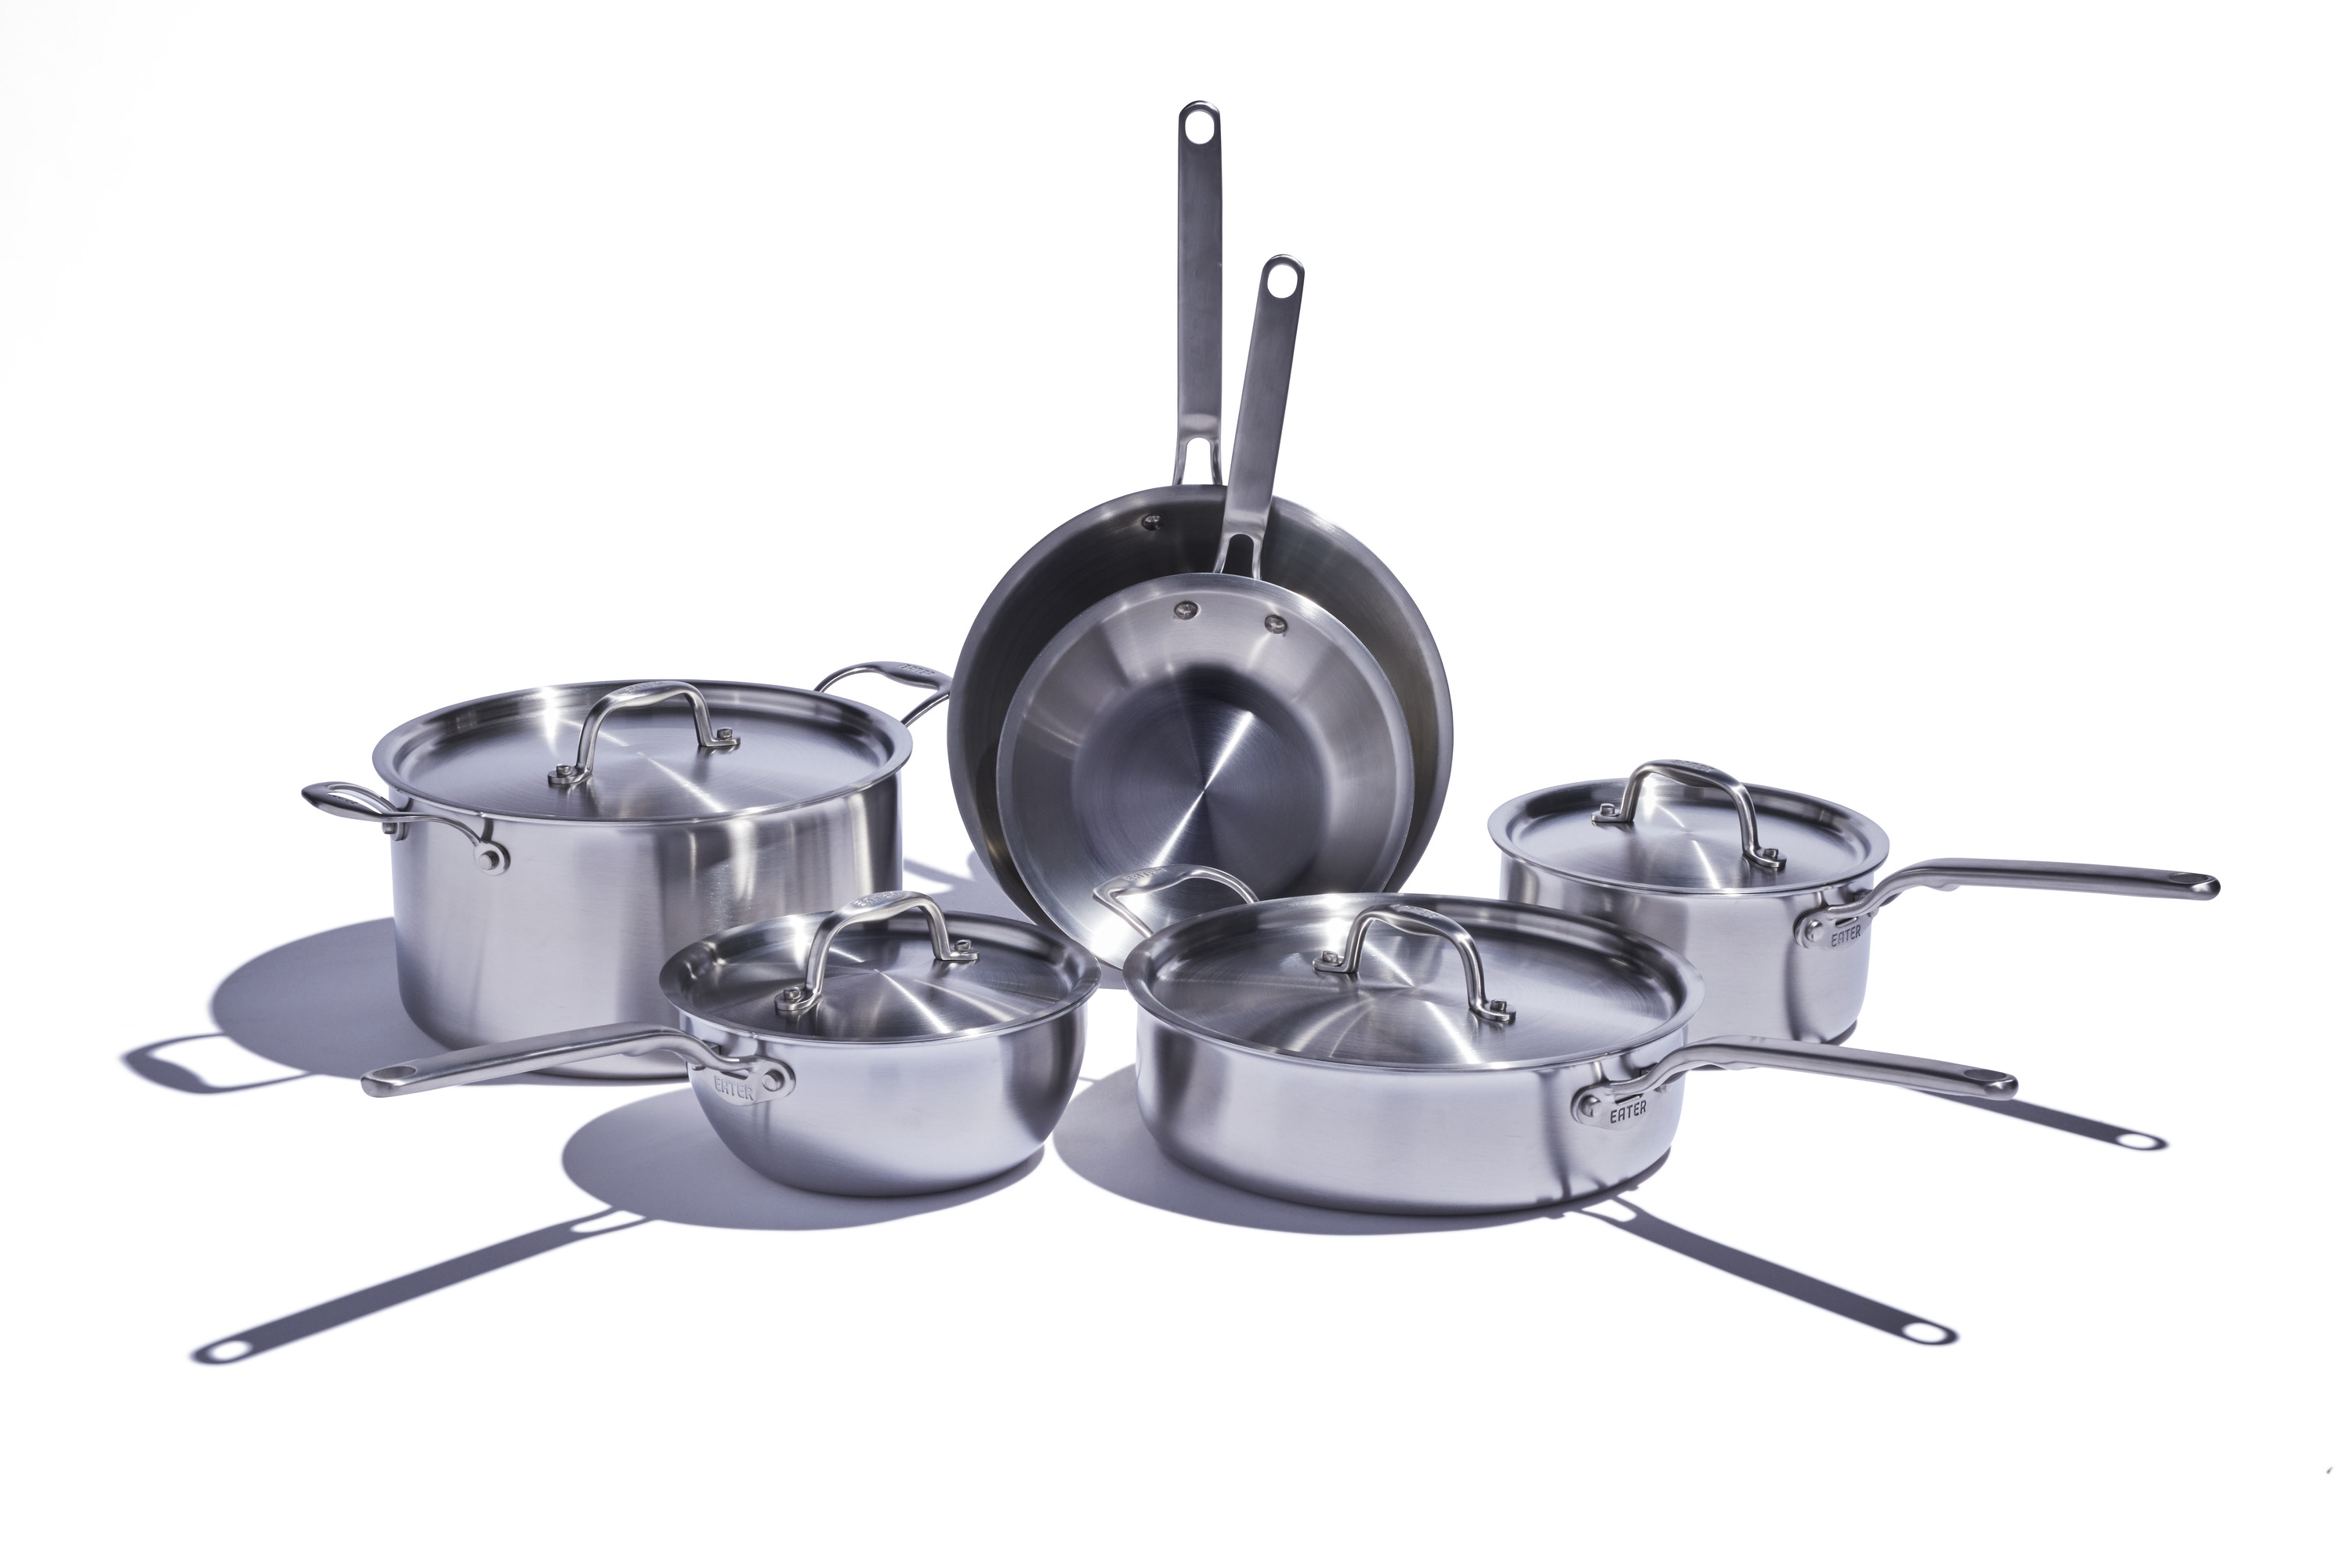 Eater Launched Stainless Steel Cookware Line - Eater